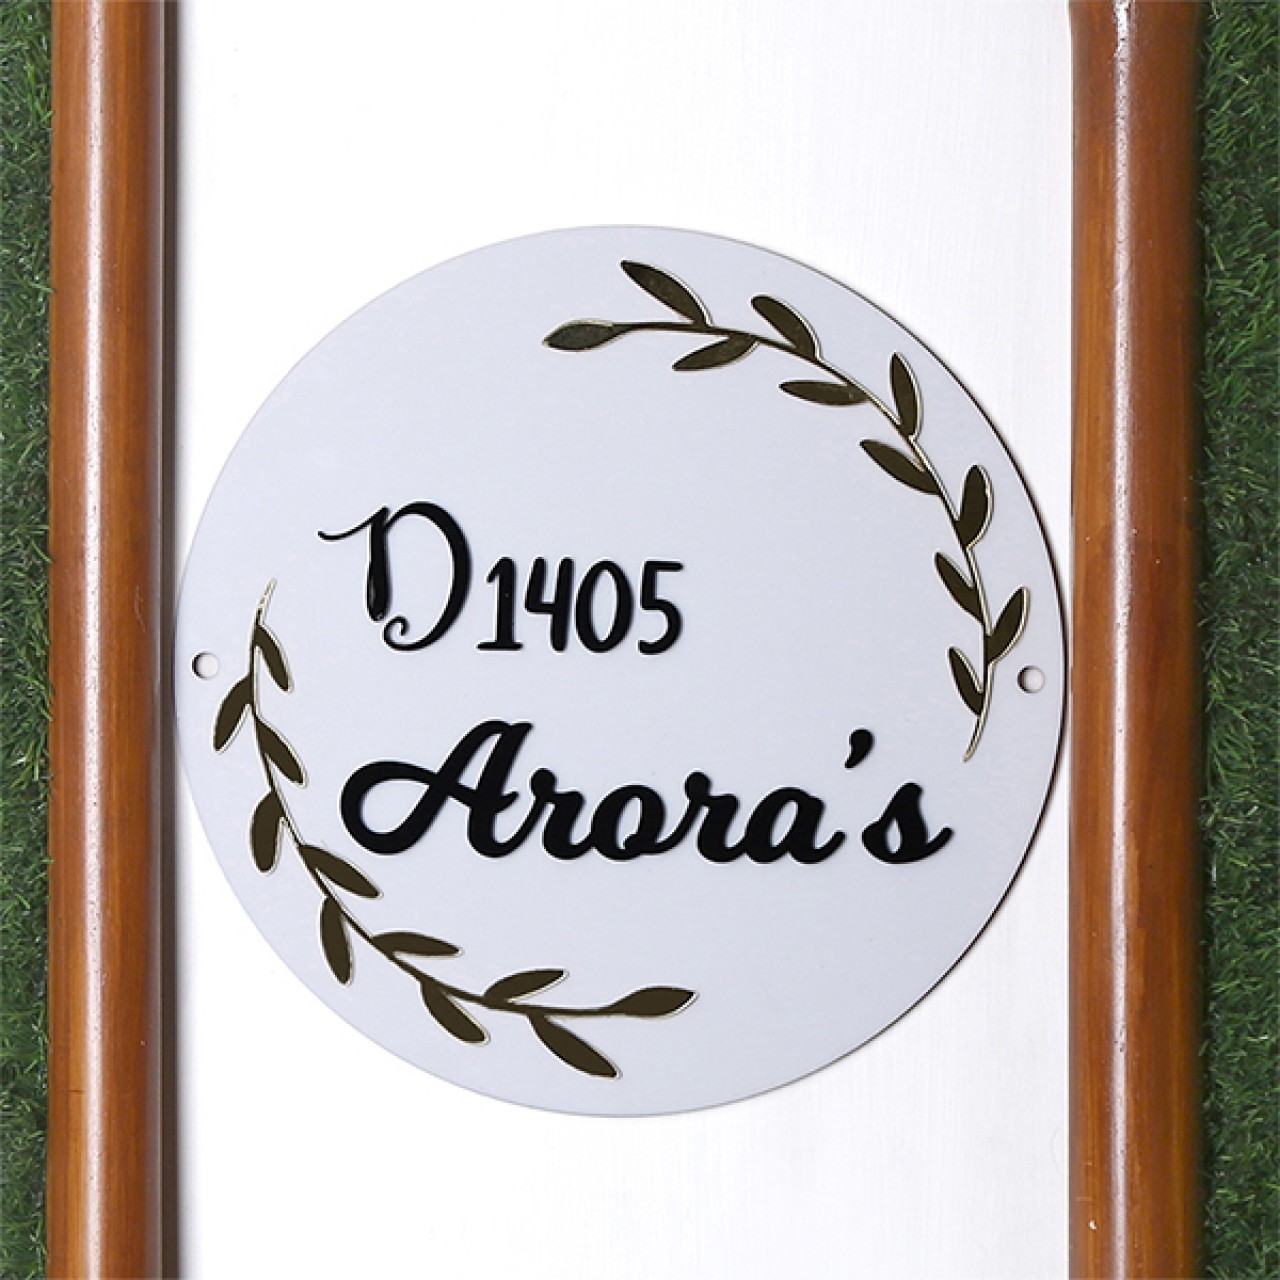 Personalized Acrylic Round Name Plate For Home